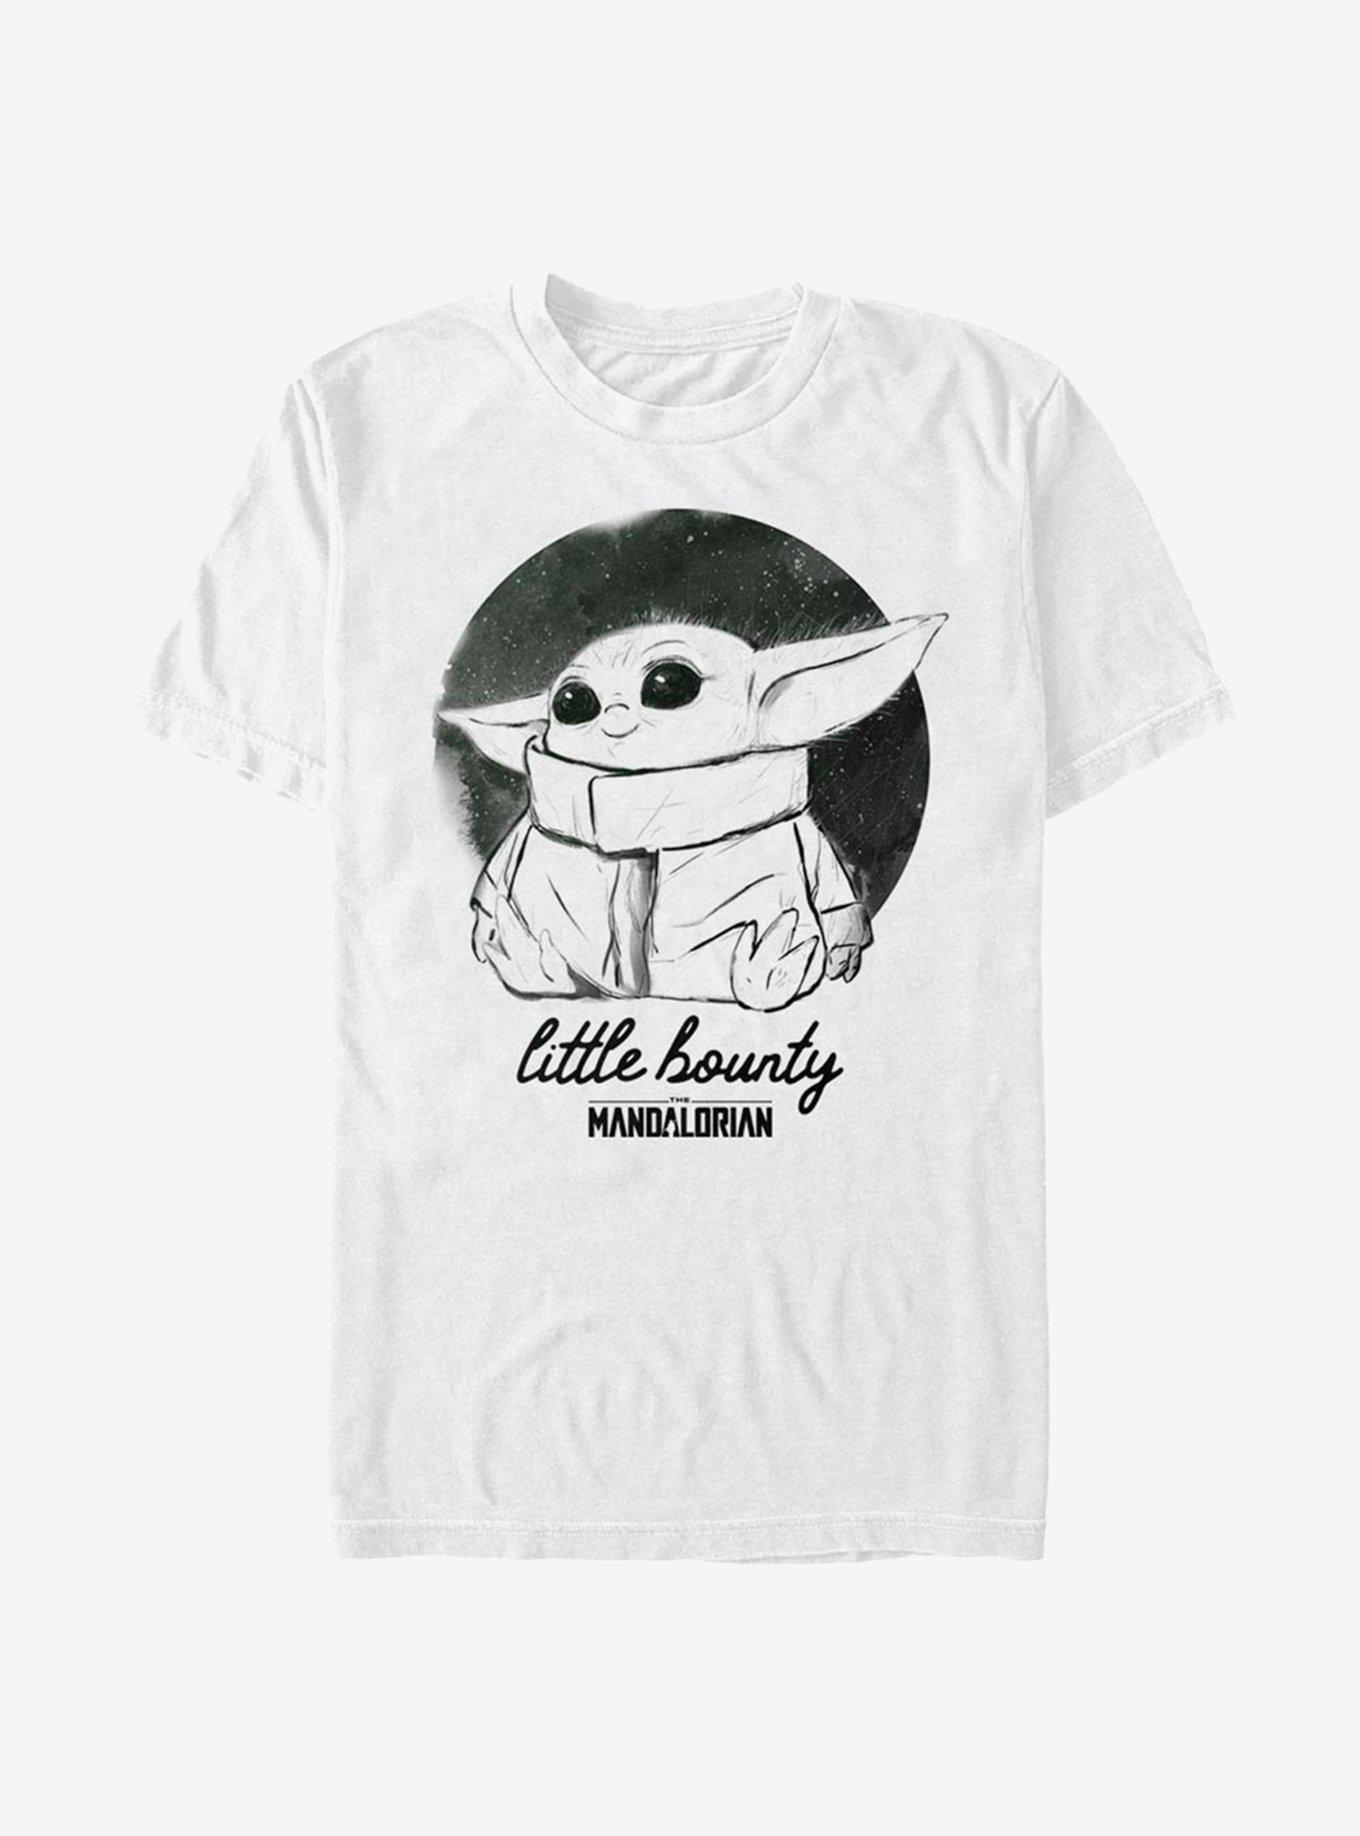 Star Wars The Mandalorian The Child Little Bounty Ink T-Shirt, WHITE, hi-res